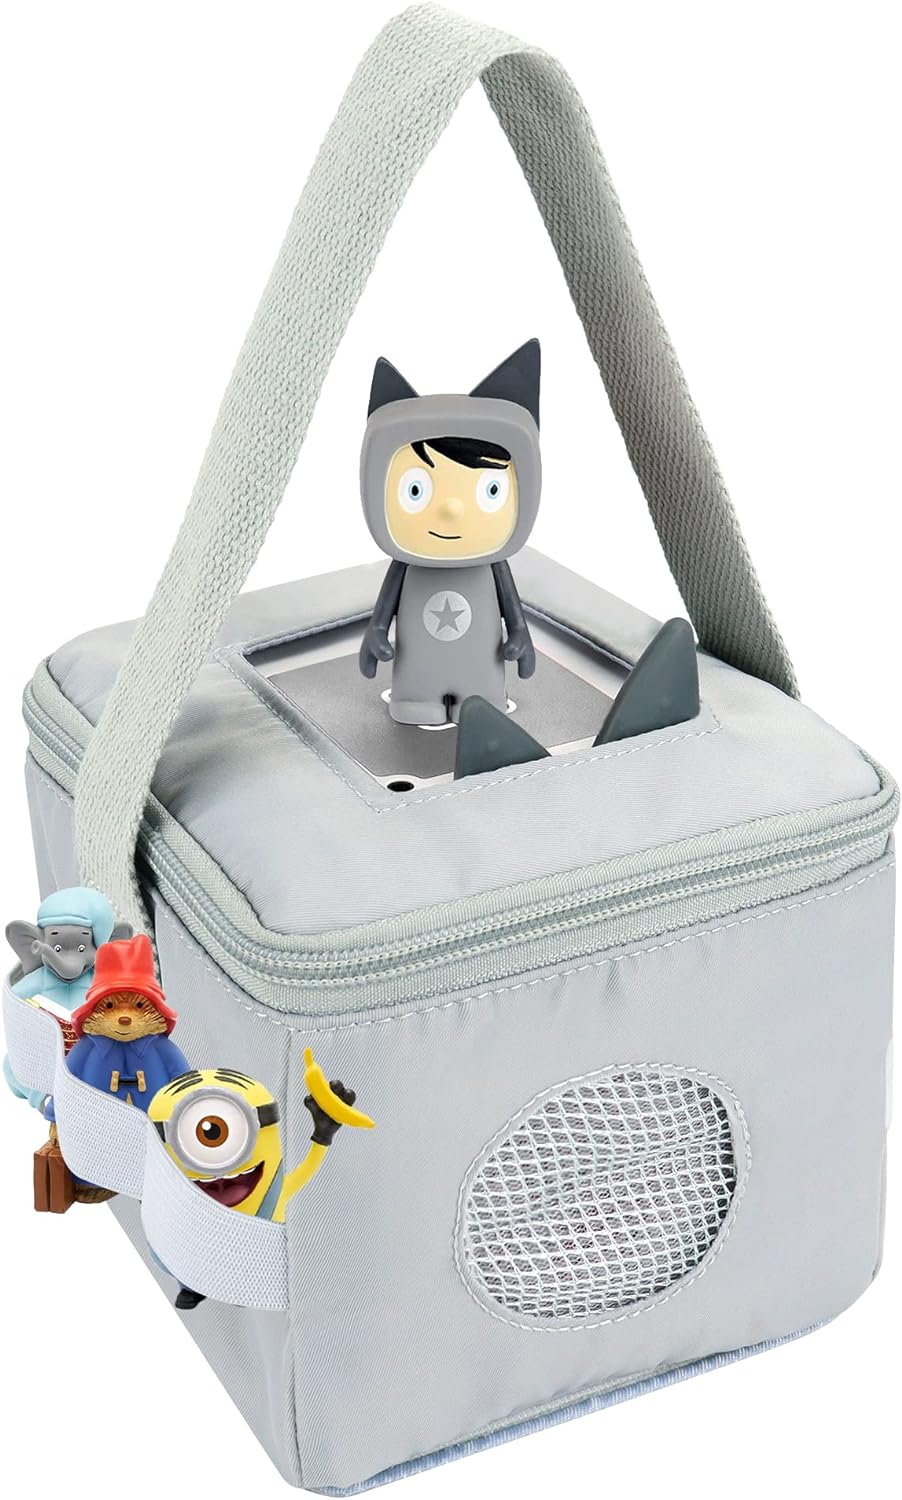 Act Fast! Bag for Tonies Characters and Toniebox, Gray Tote Bag for Tonies Figurines